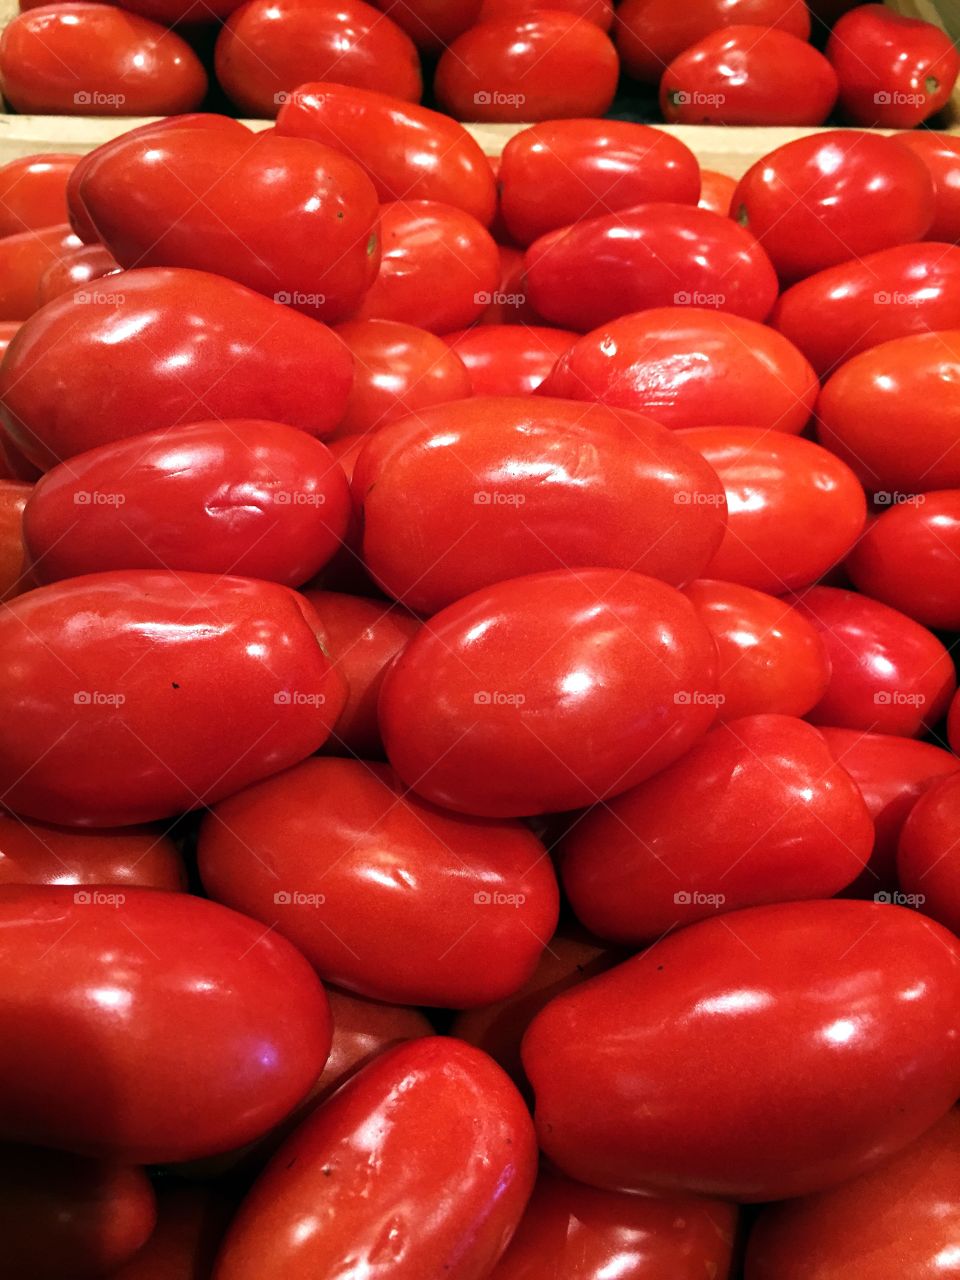 Tomatoes. A selection of delicious ripe red Roma tomatoes.